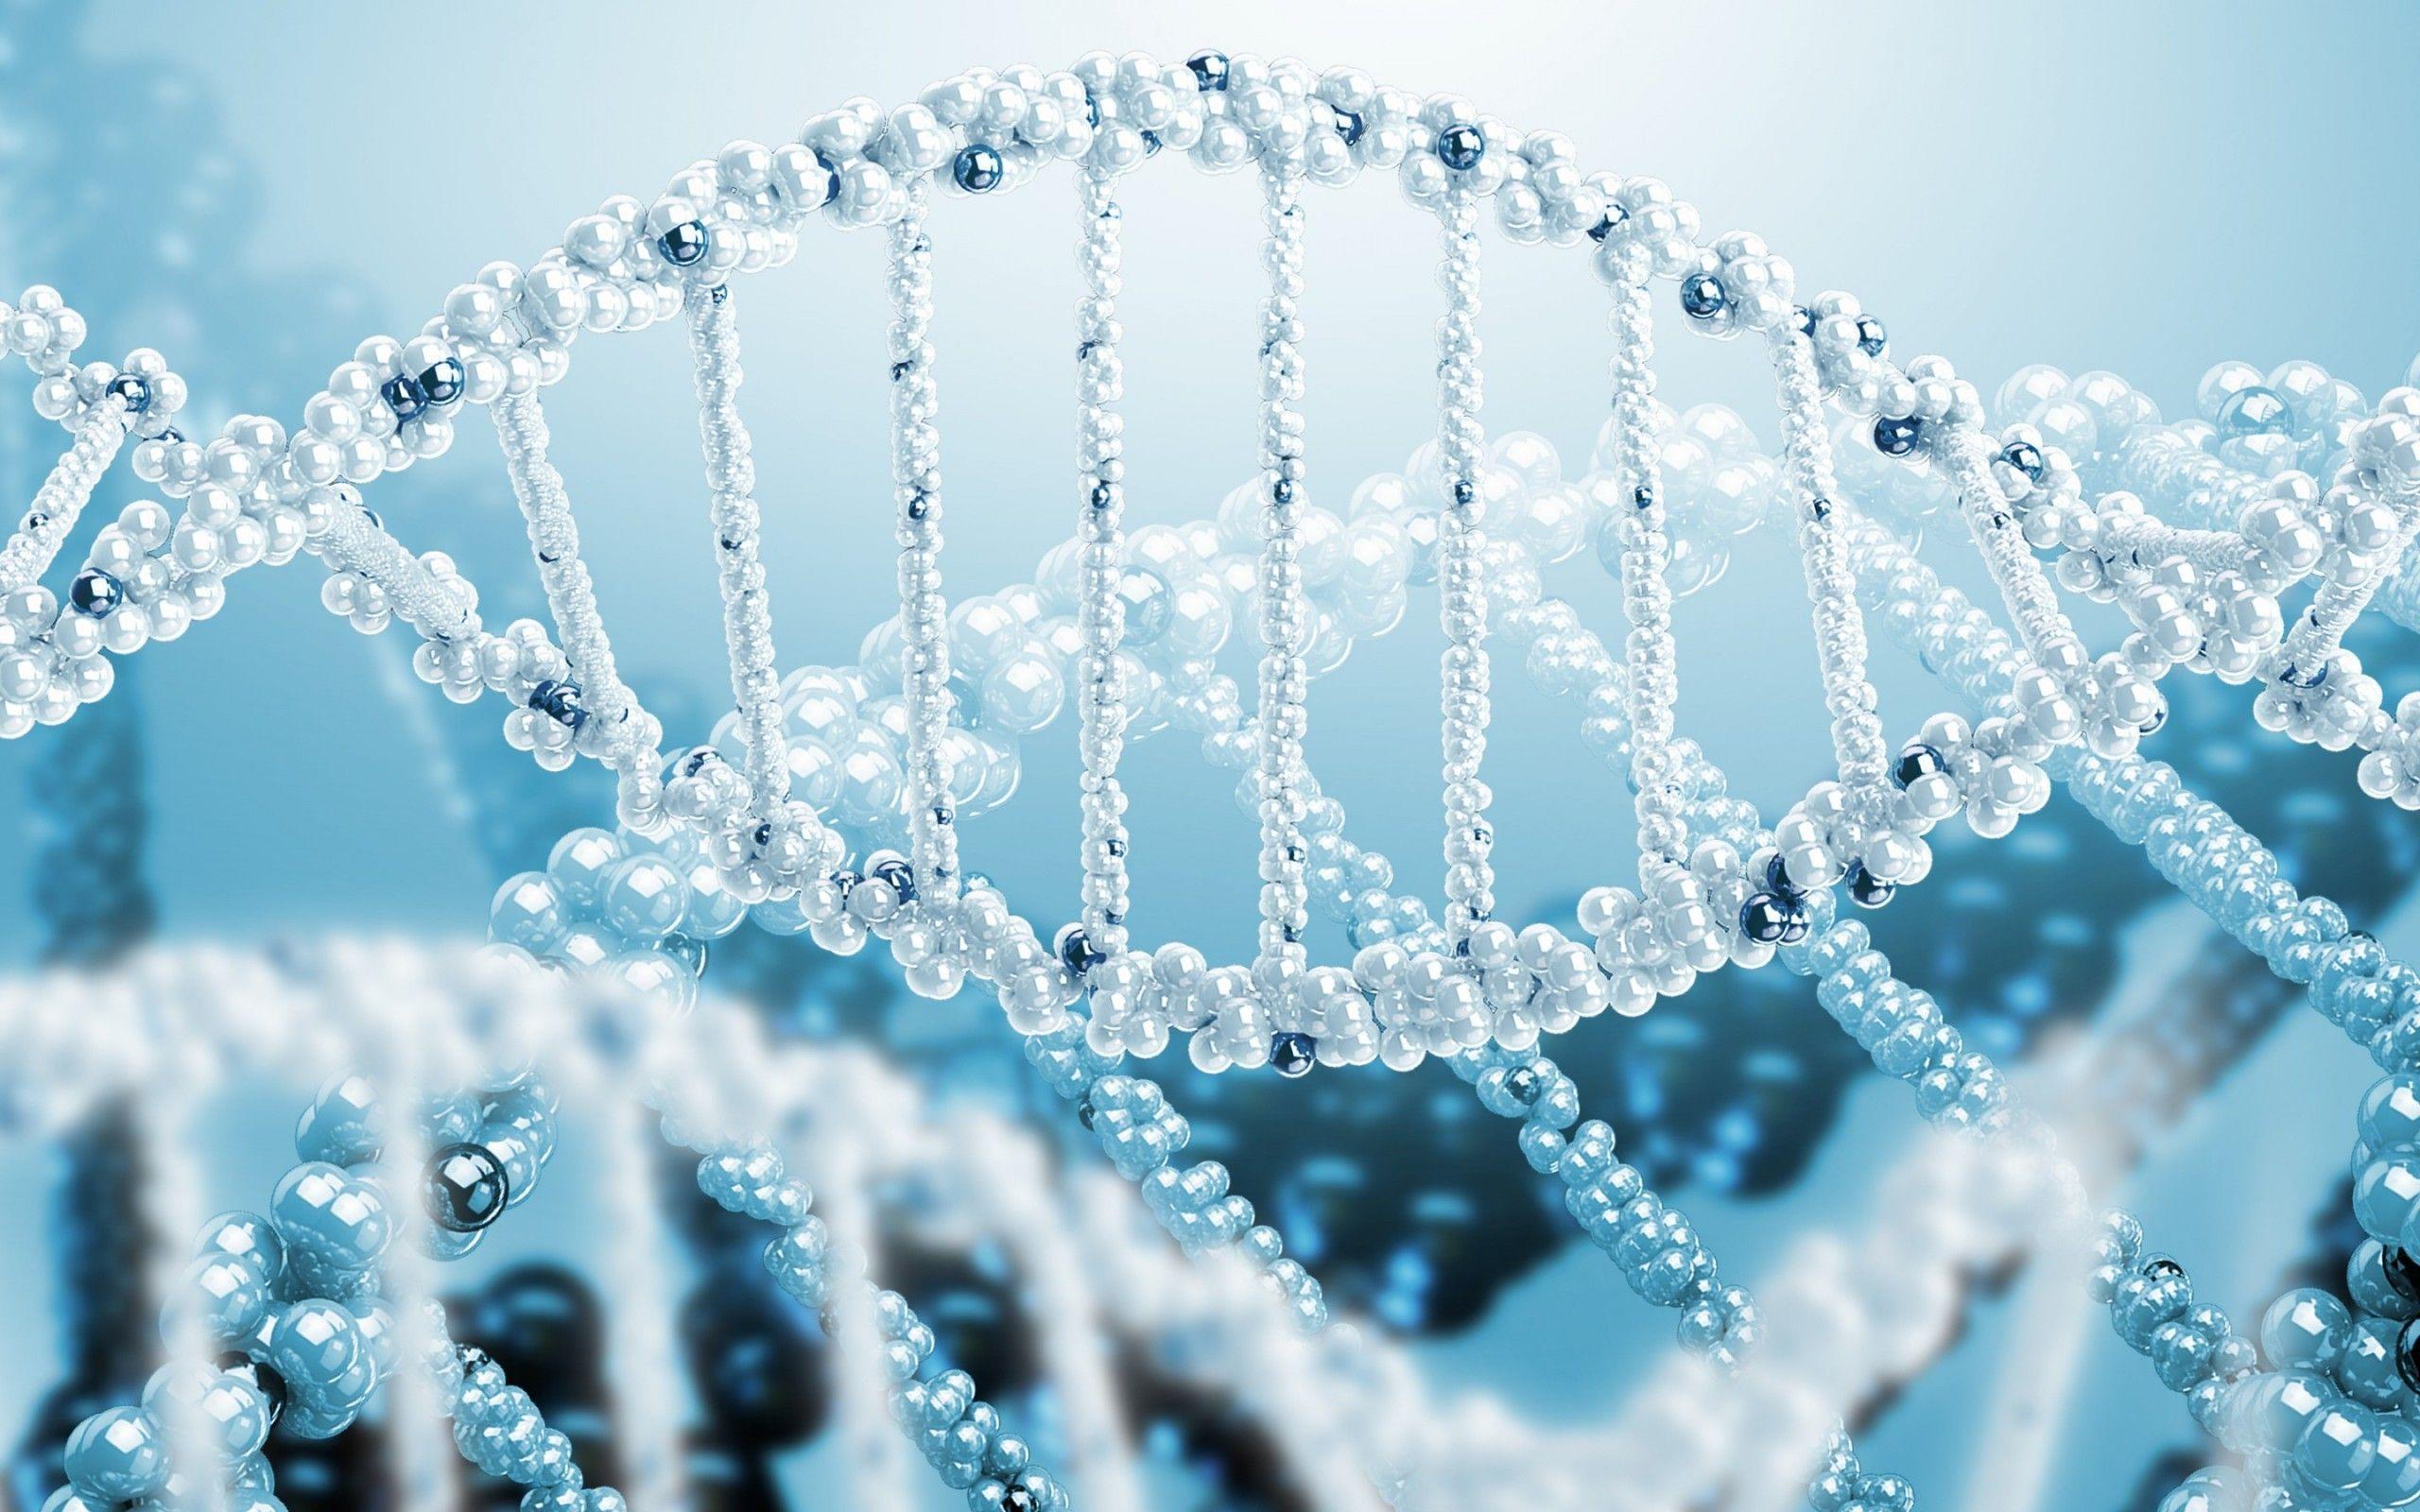 DNA wallpaper, Find best latest DNA wallpaper in HD for your PC